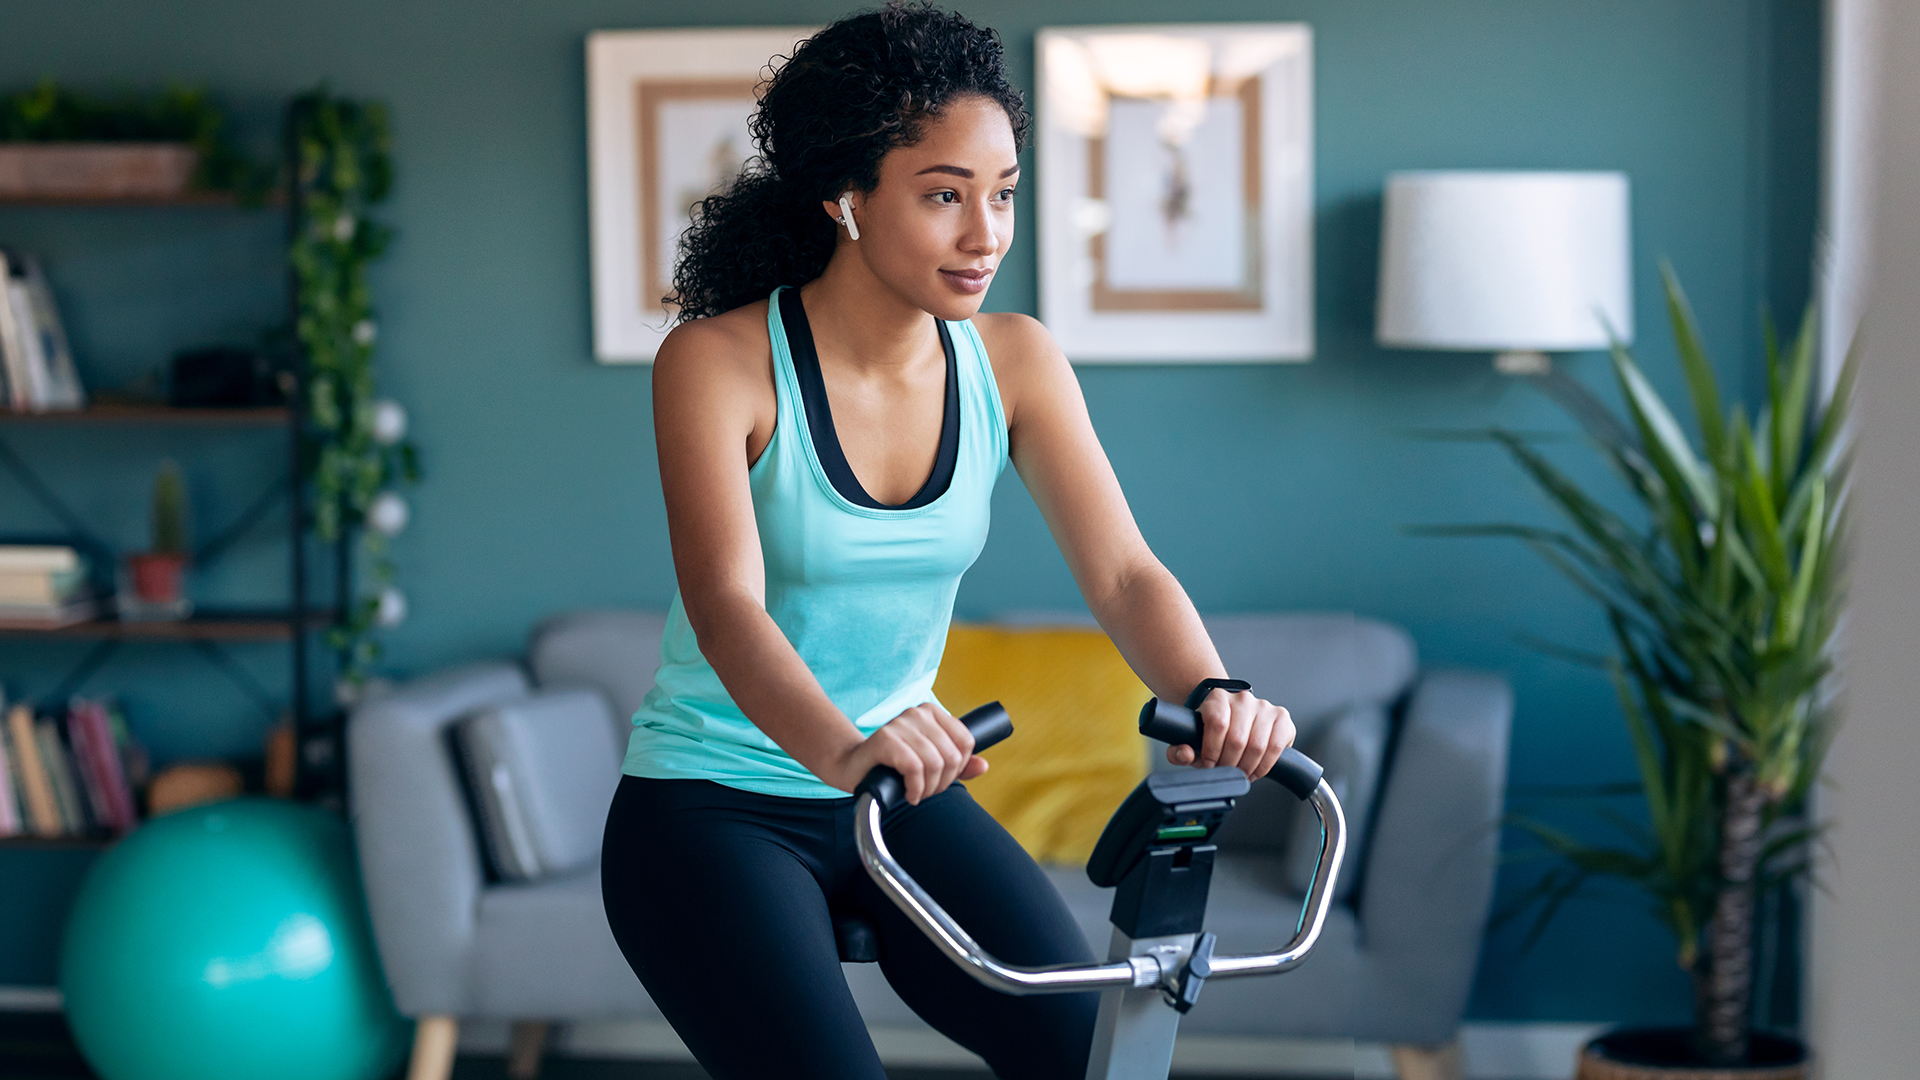 Exercise bike for sale: A woman works on an exercise bike in her living room